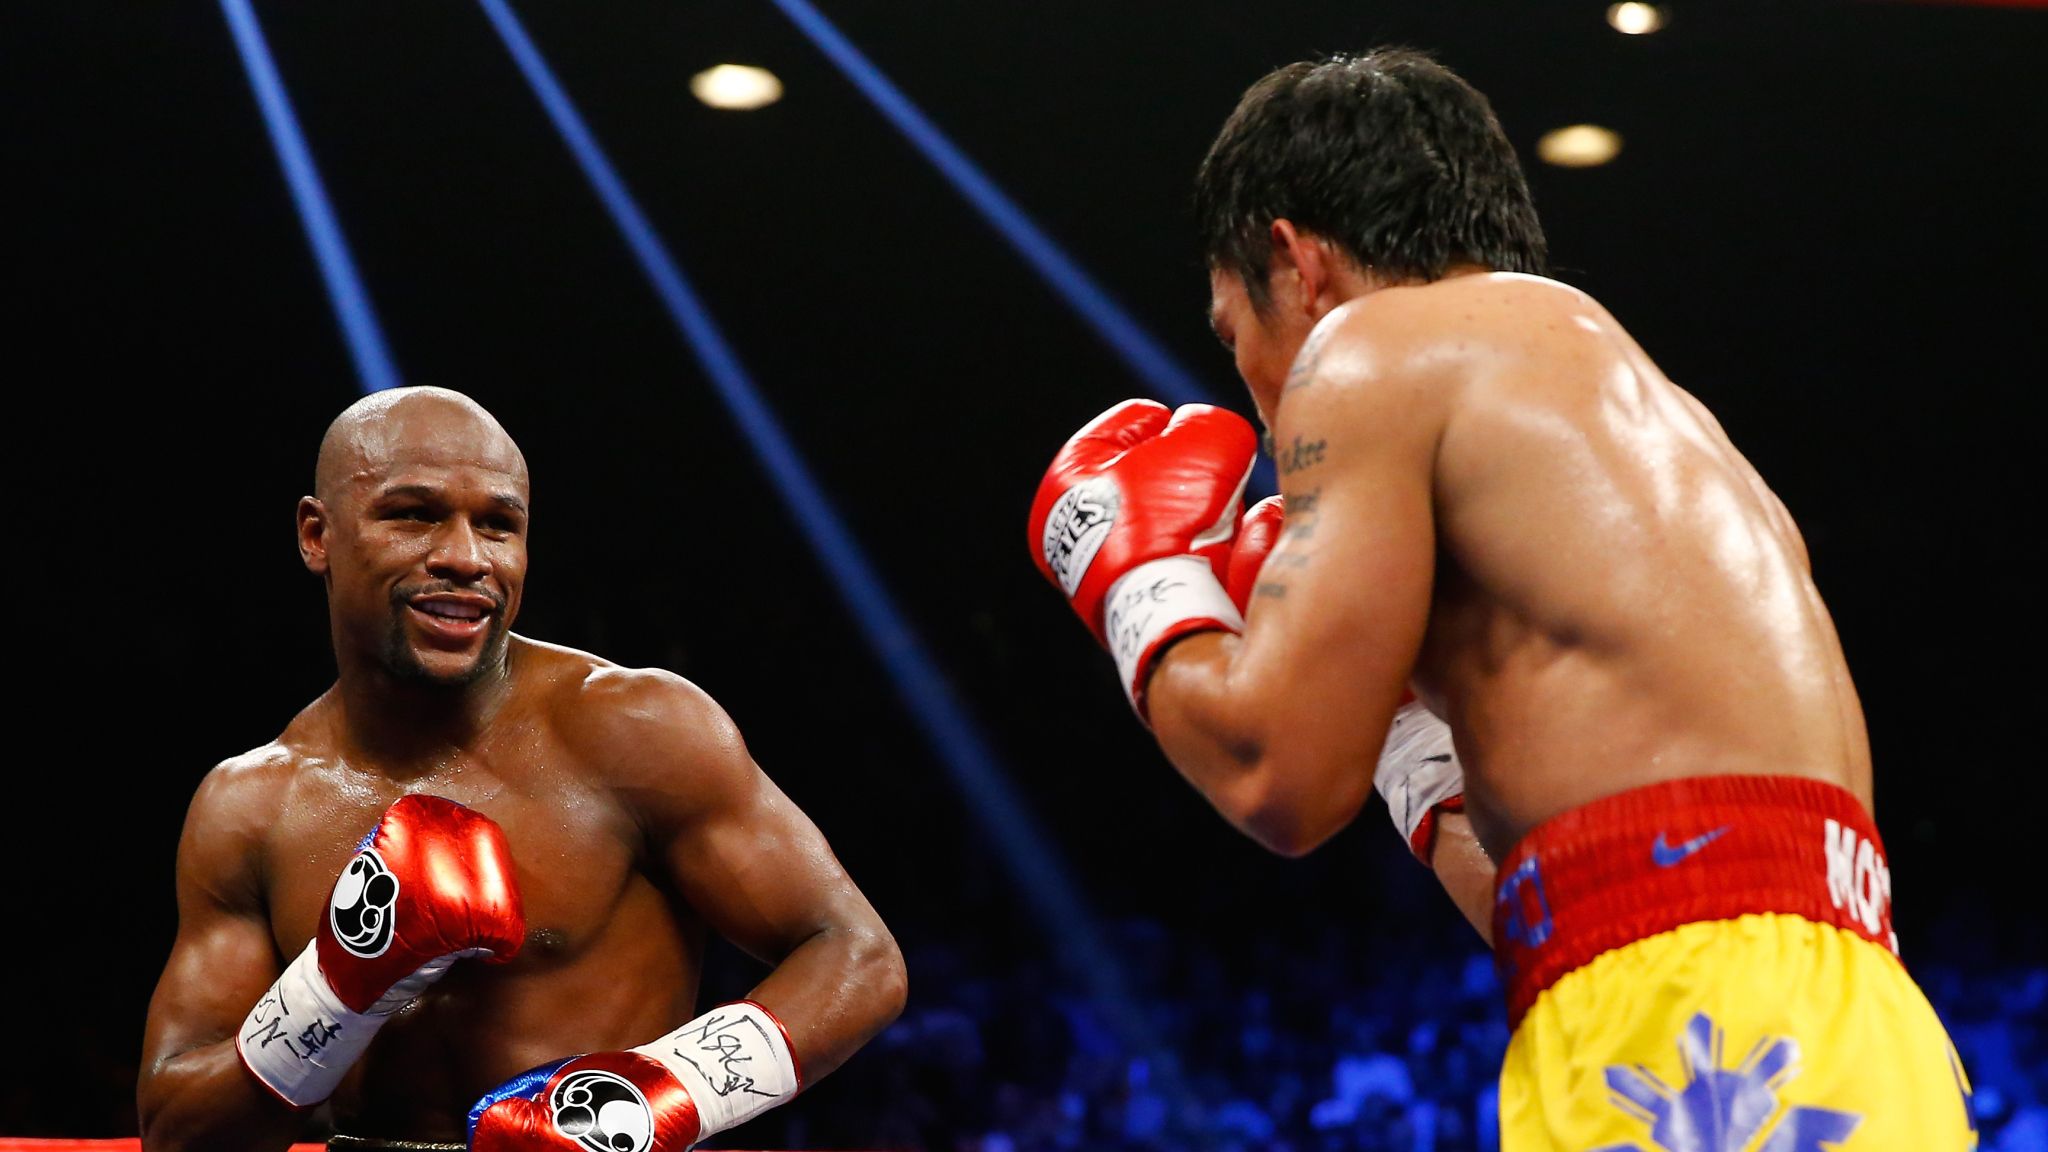 Mayweather pacquiao betting online cryptocurrency price table